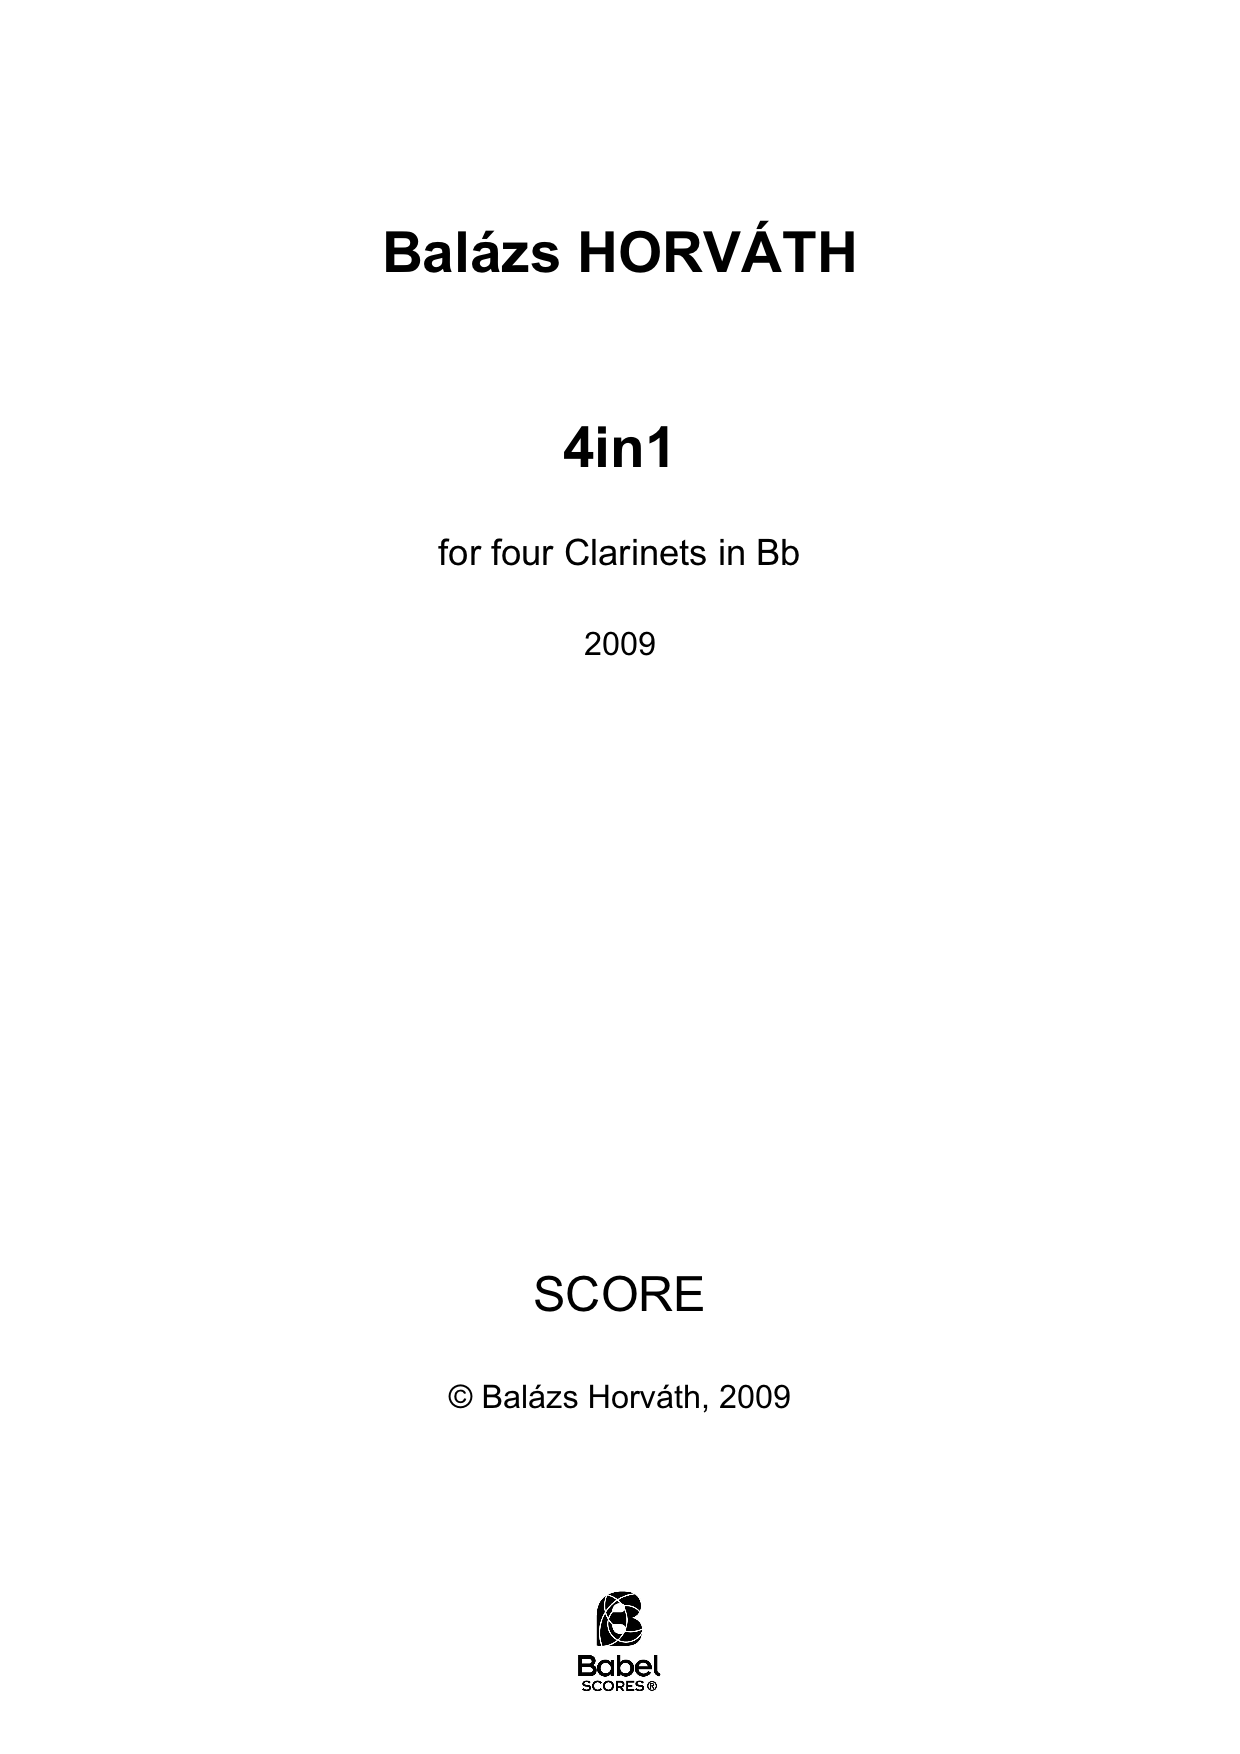 4in1_score Balazs HORVATH A4 z 1 329